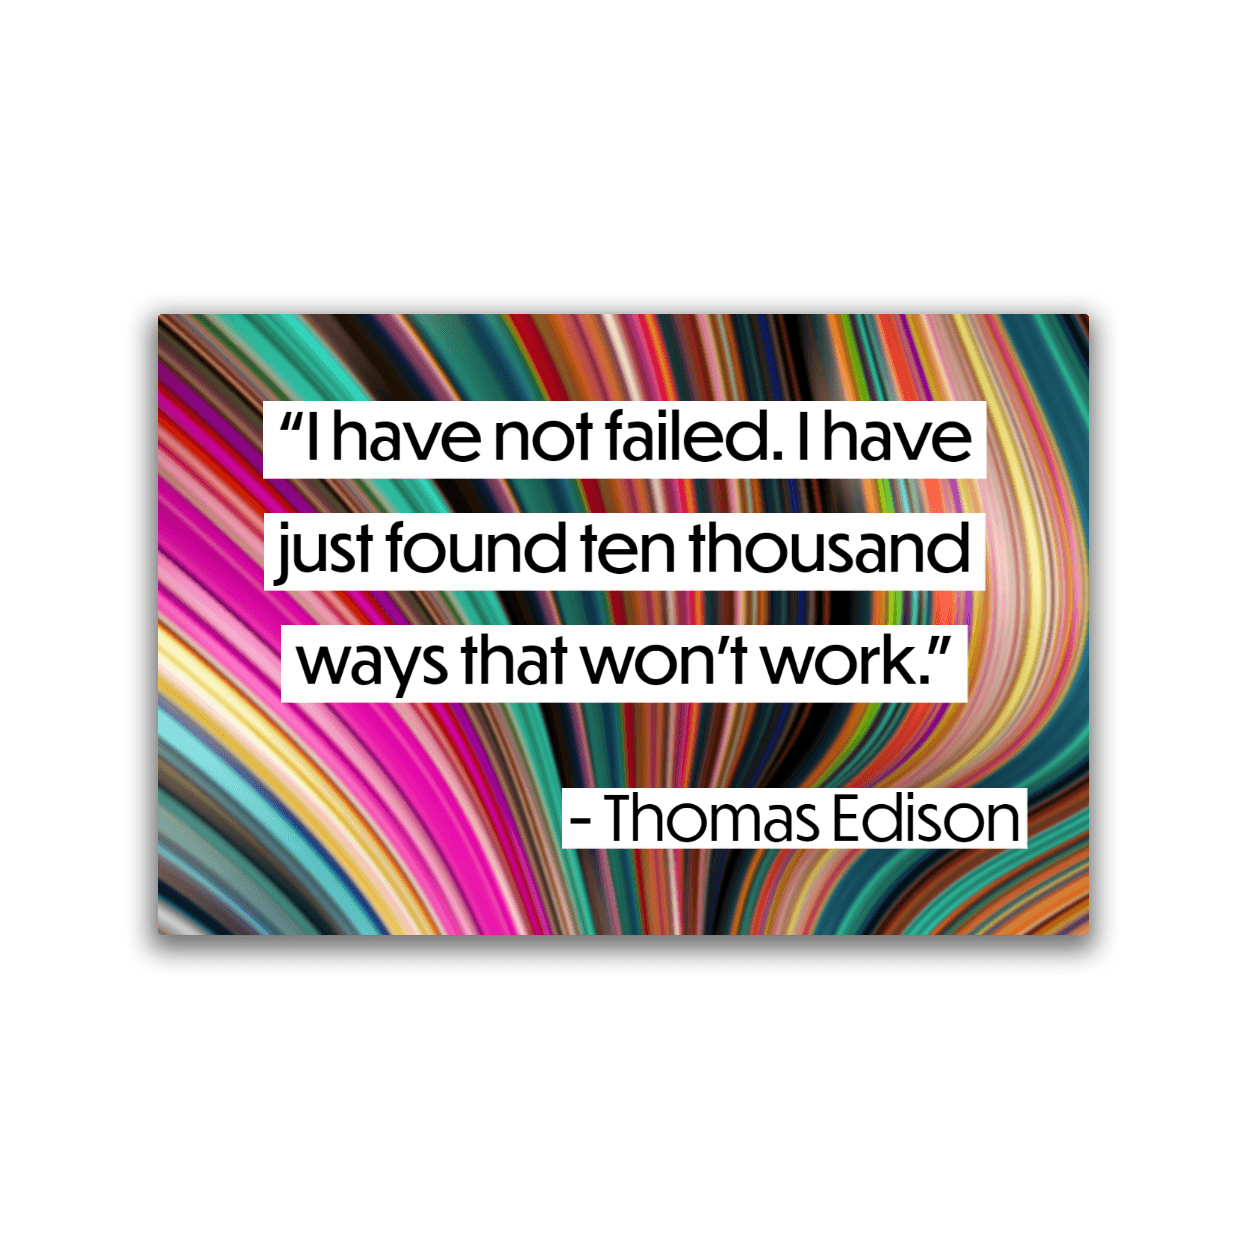 Image of a 2x3 magnet with a Thomas Edison quote